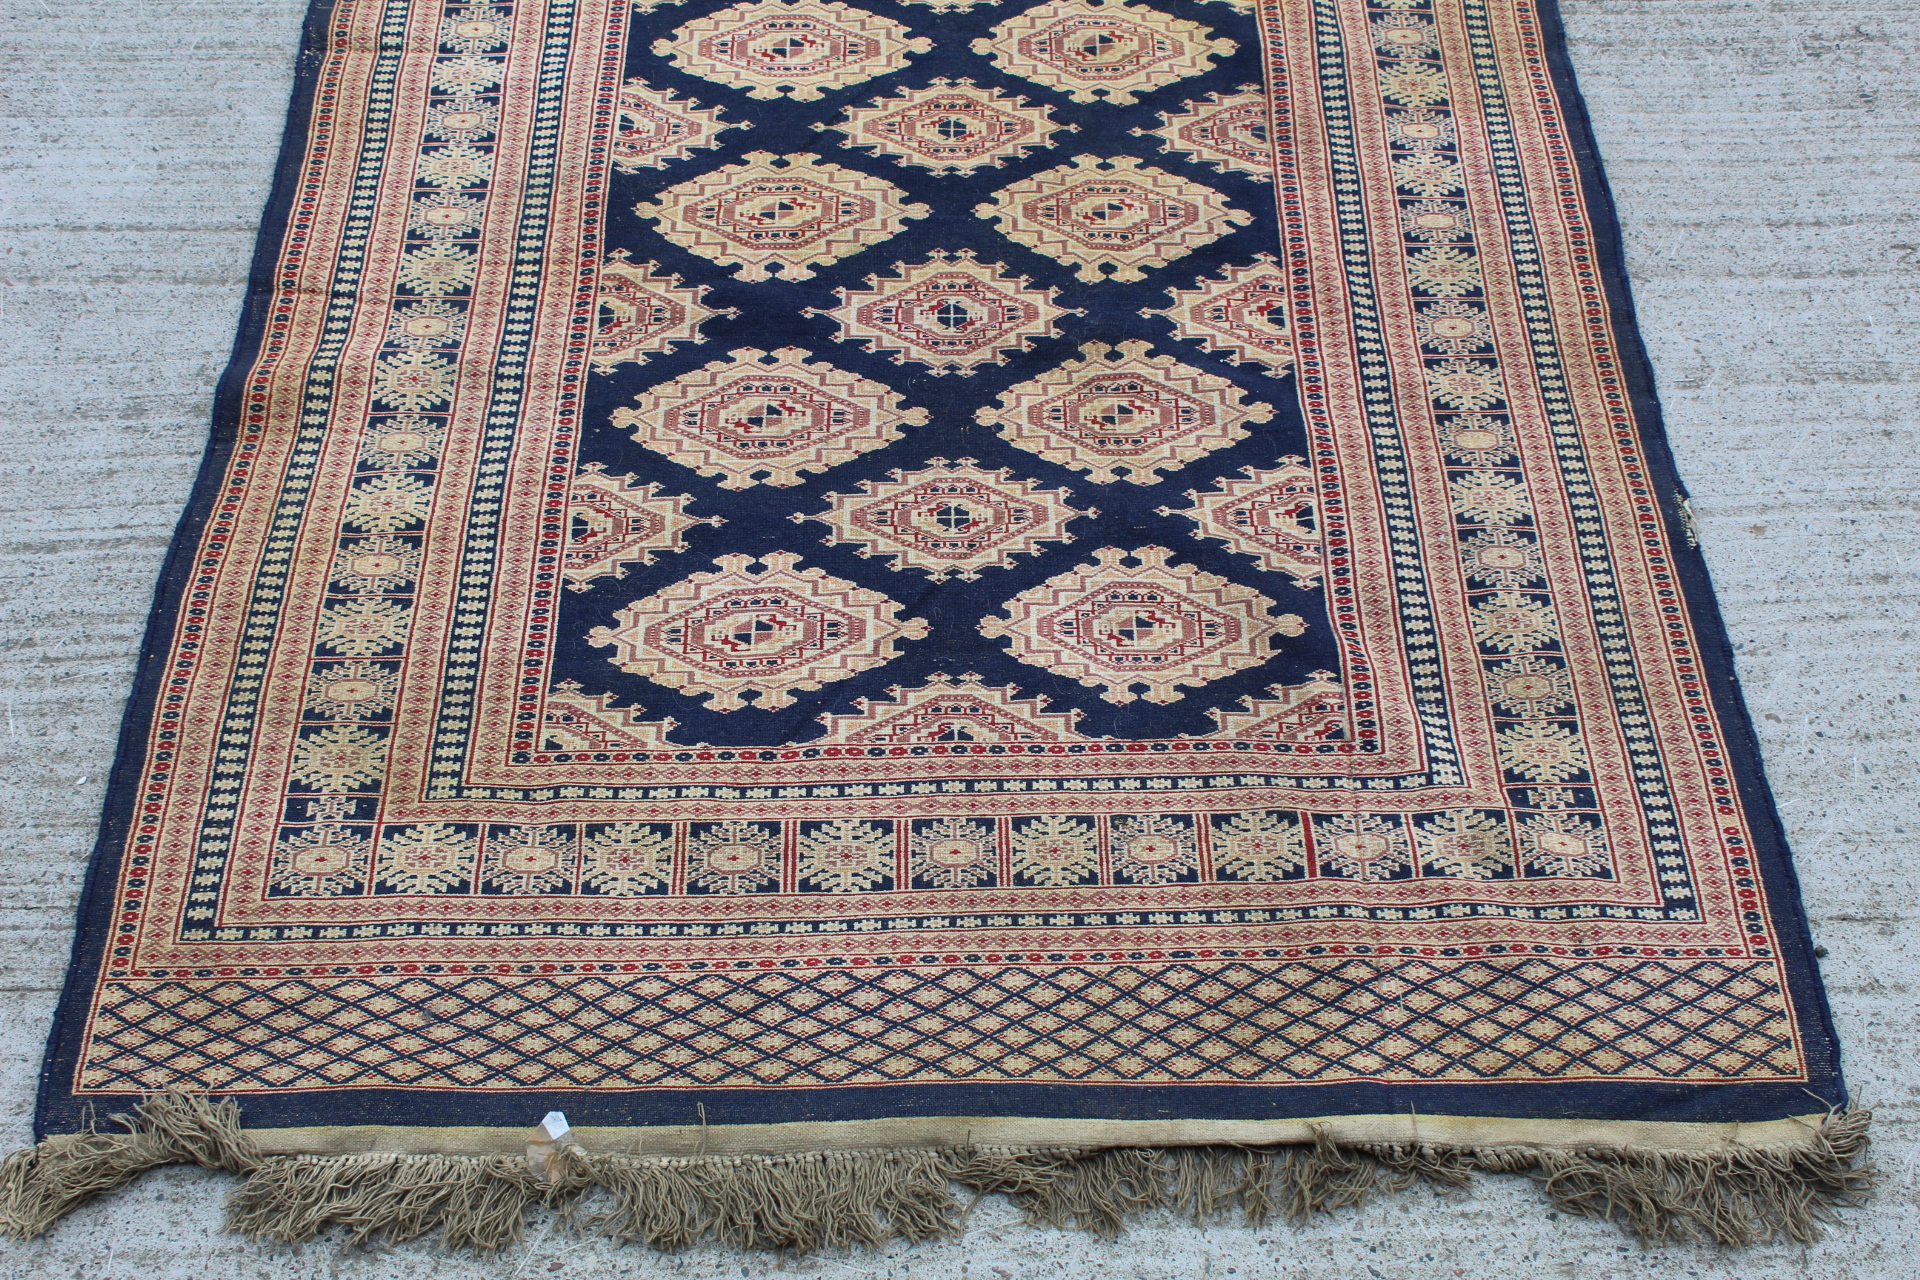 Eastern wool rug with multiple hooked octagonal medallions on blue field, 201cm x 124cm. - Image 7 of 12